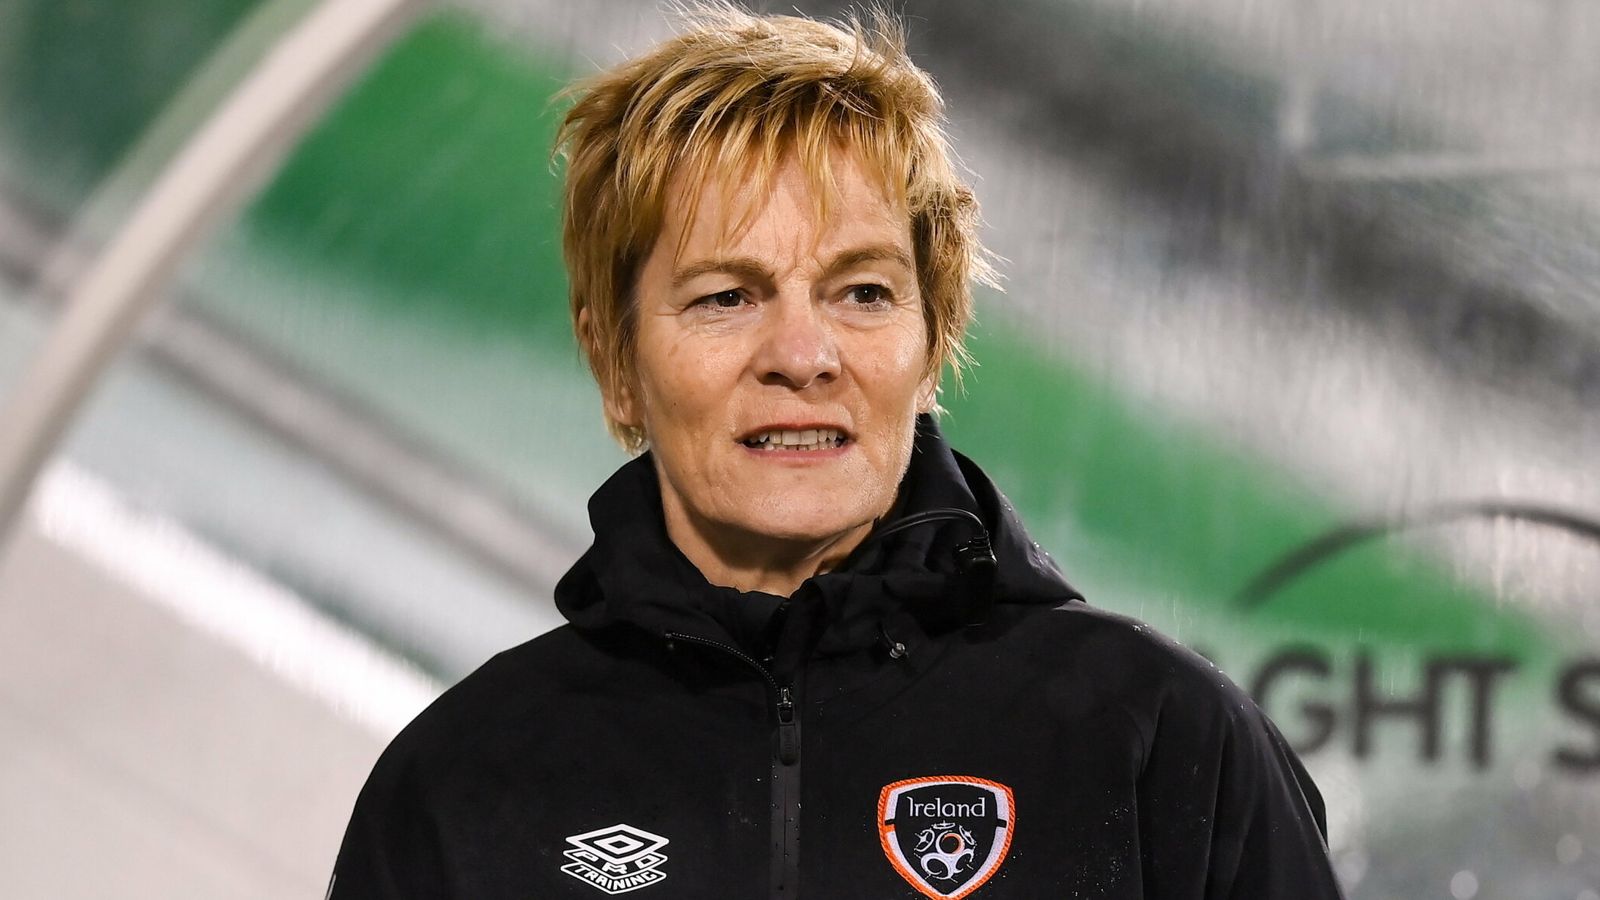 Football Association of Ireland supports Vera Pauw about allegations of rape and abuse when she was a player | Football News